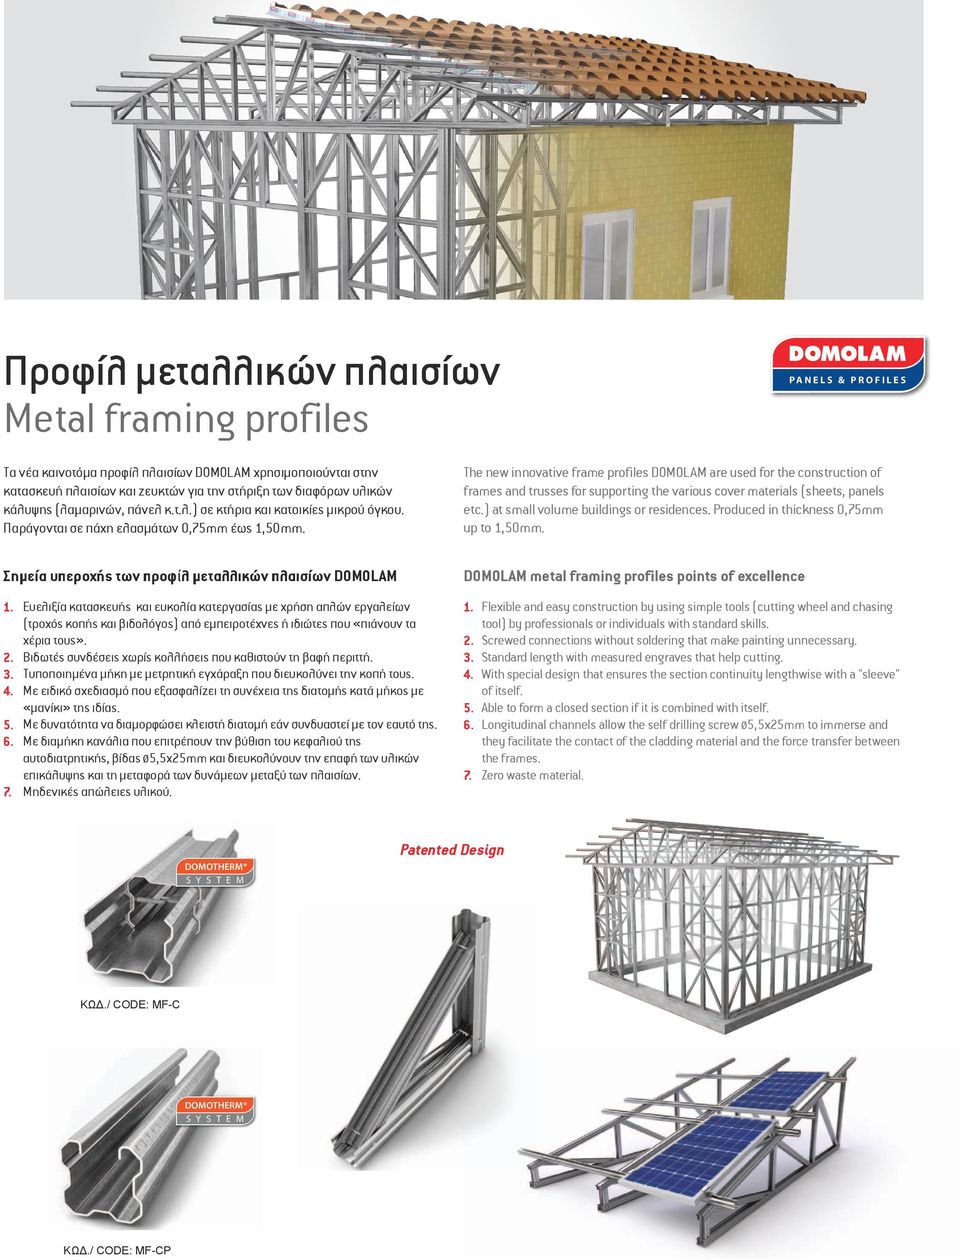 The new innovative frame profiles DOMOLAM are used for the construction of frames and trusses for supporting the various cover materials (sheets, panels etc.) at small volume buildings or residences.